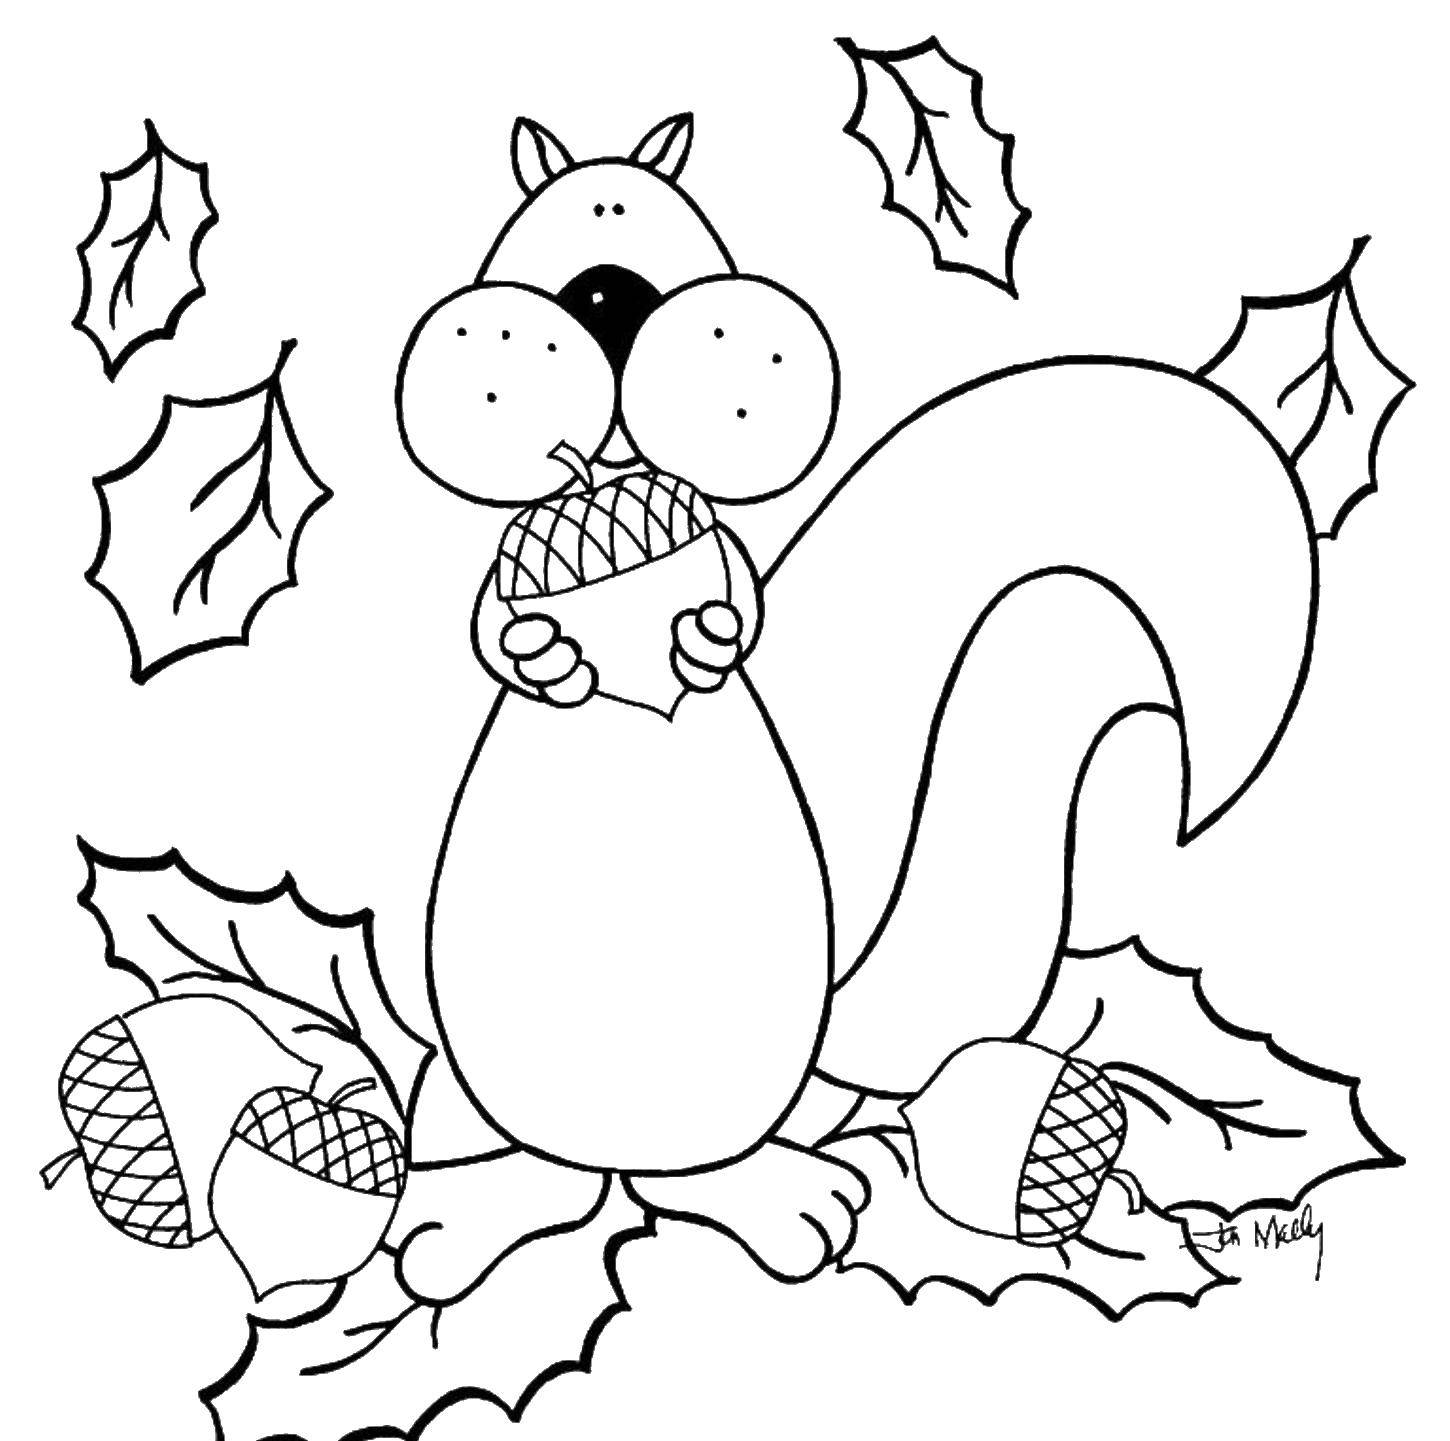 Coloring A squirrel collects nuts. Category Autumn leaves falling. Tags:  protein, nuts.